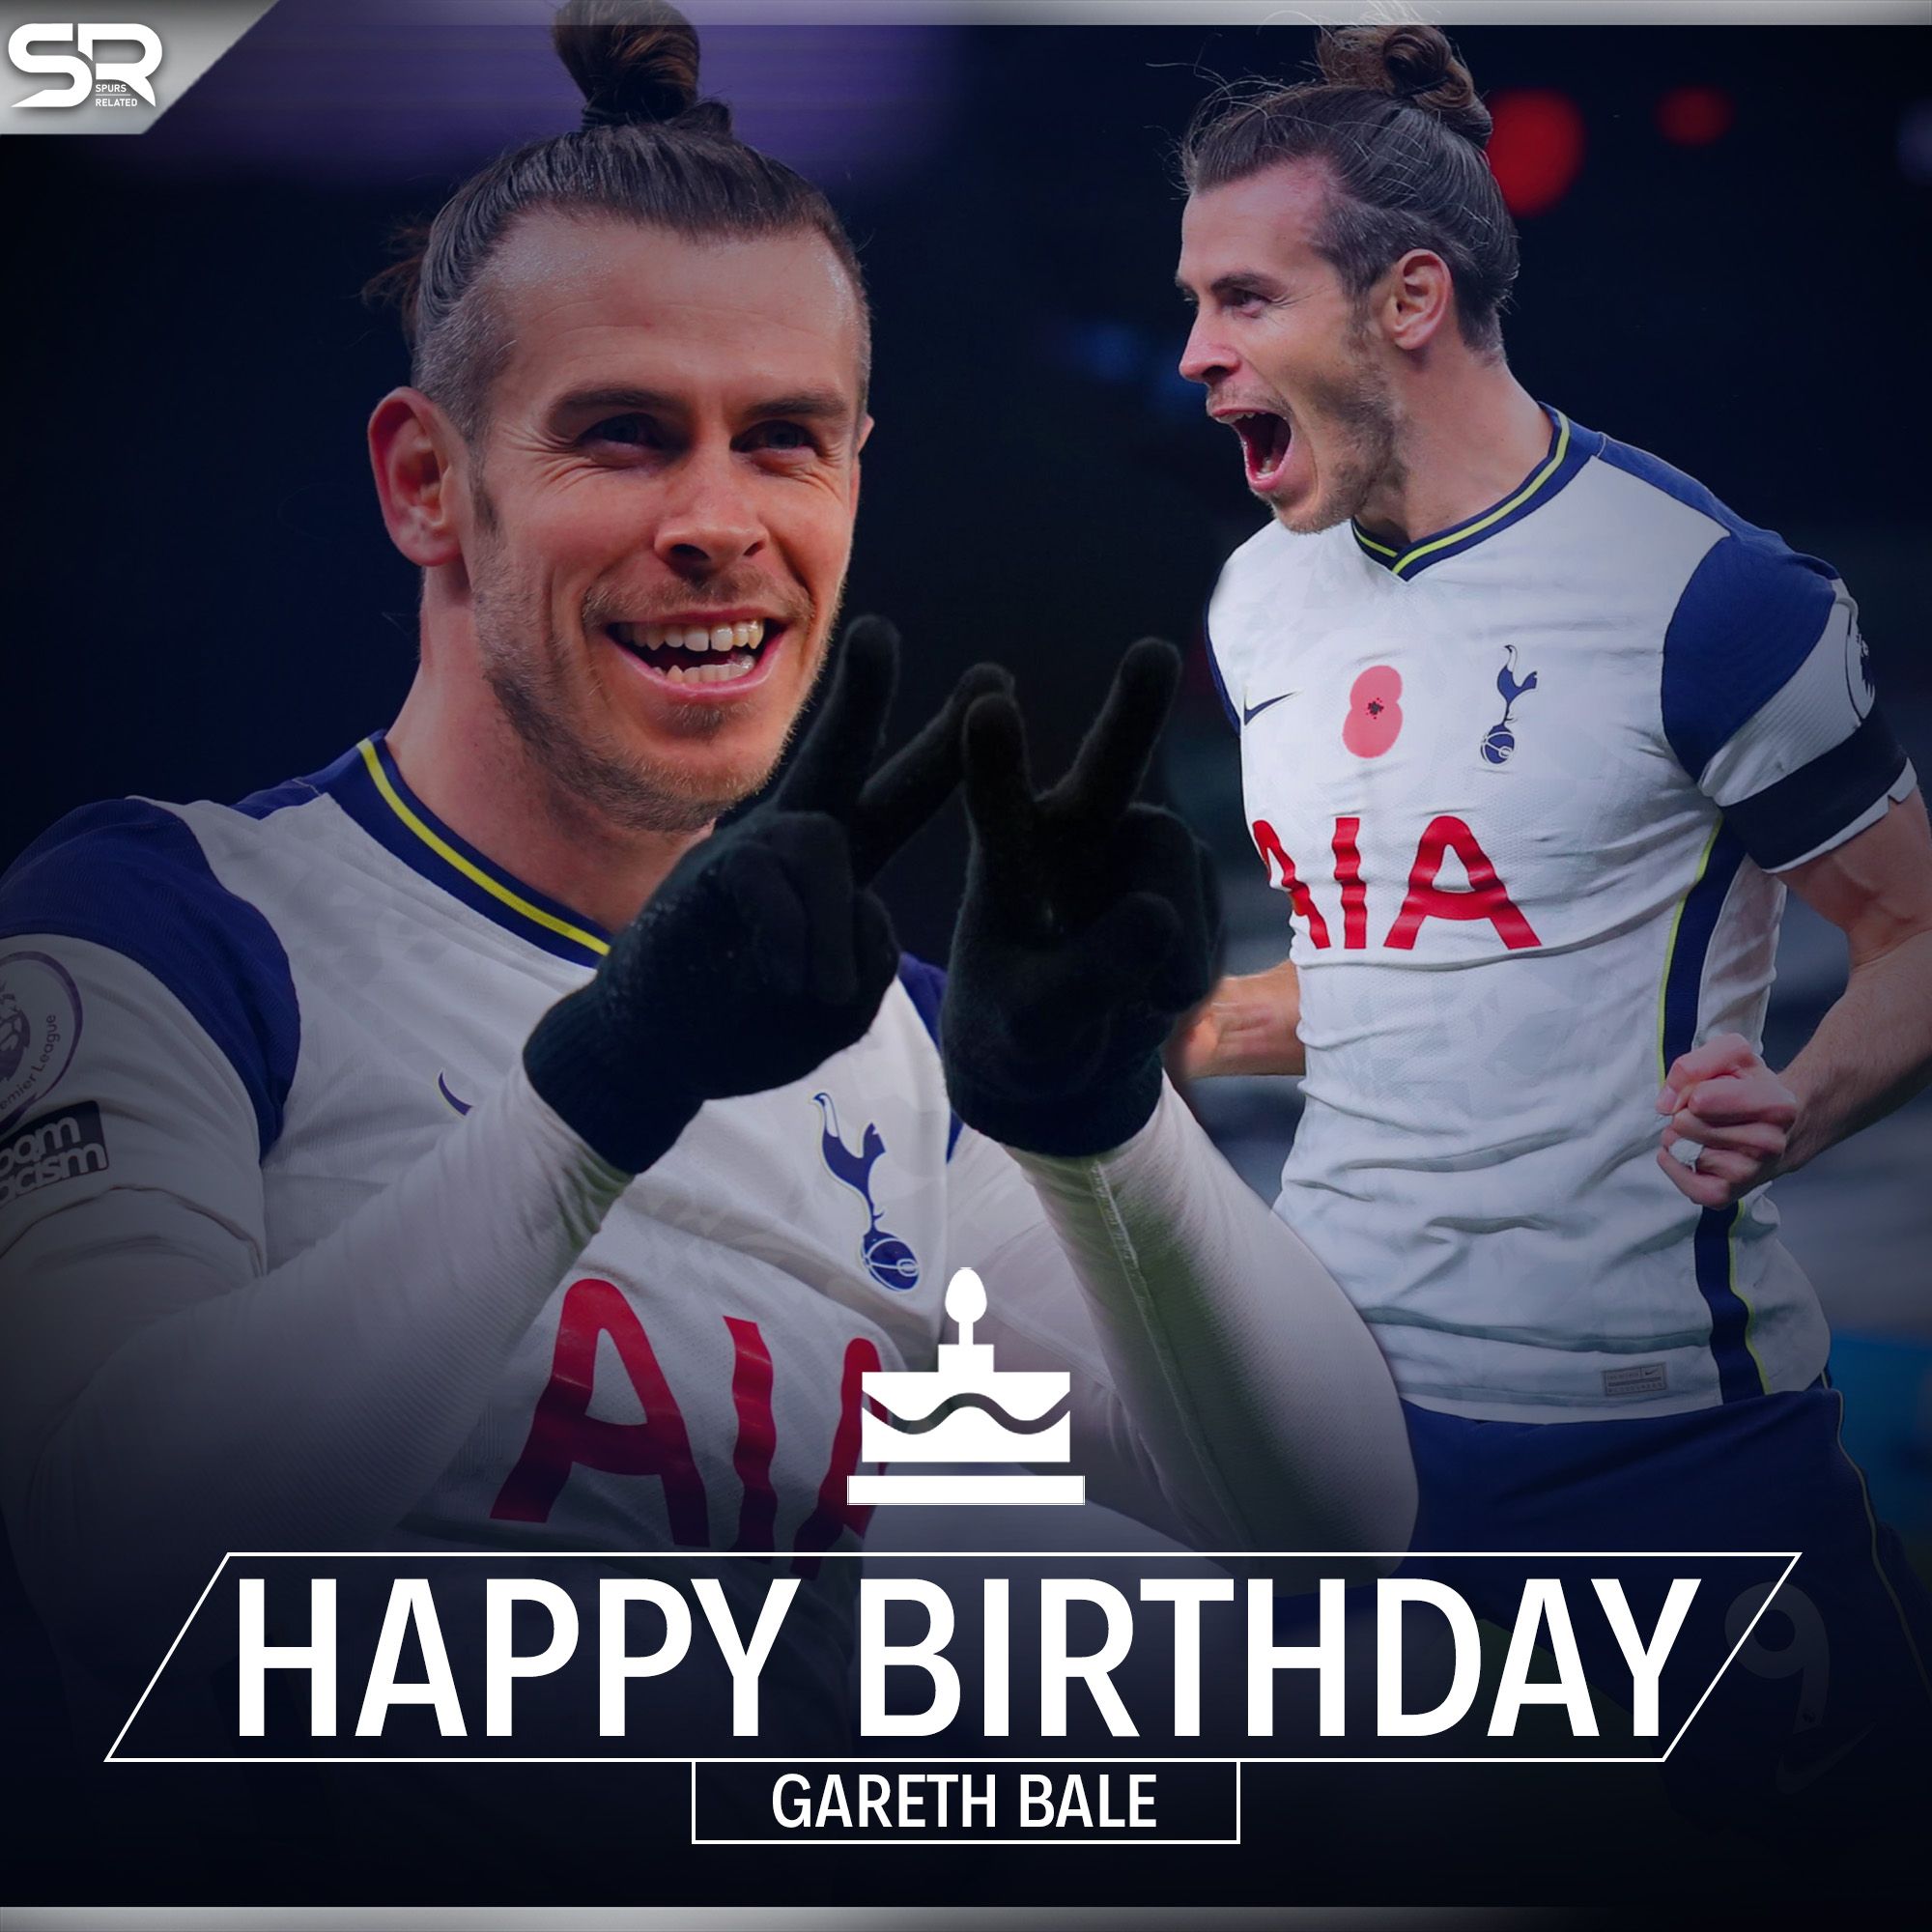  Happy 32nd Birthday to Gareth Bale       !
& Happy 33rd Birthday to Mousa Dembele  !  